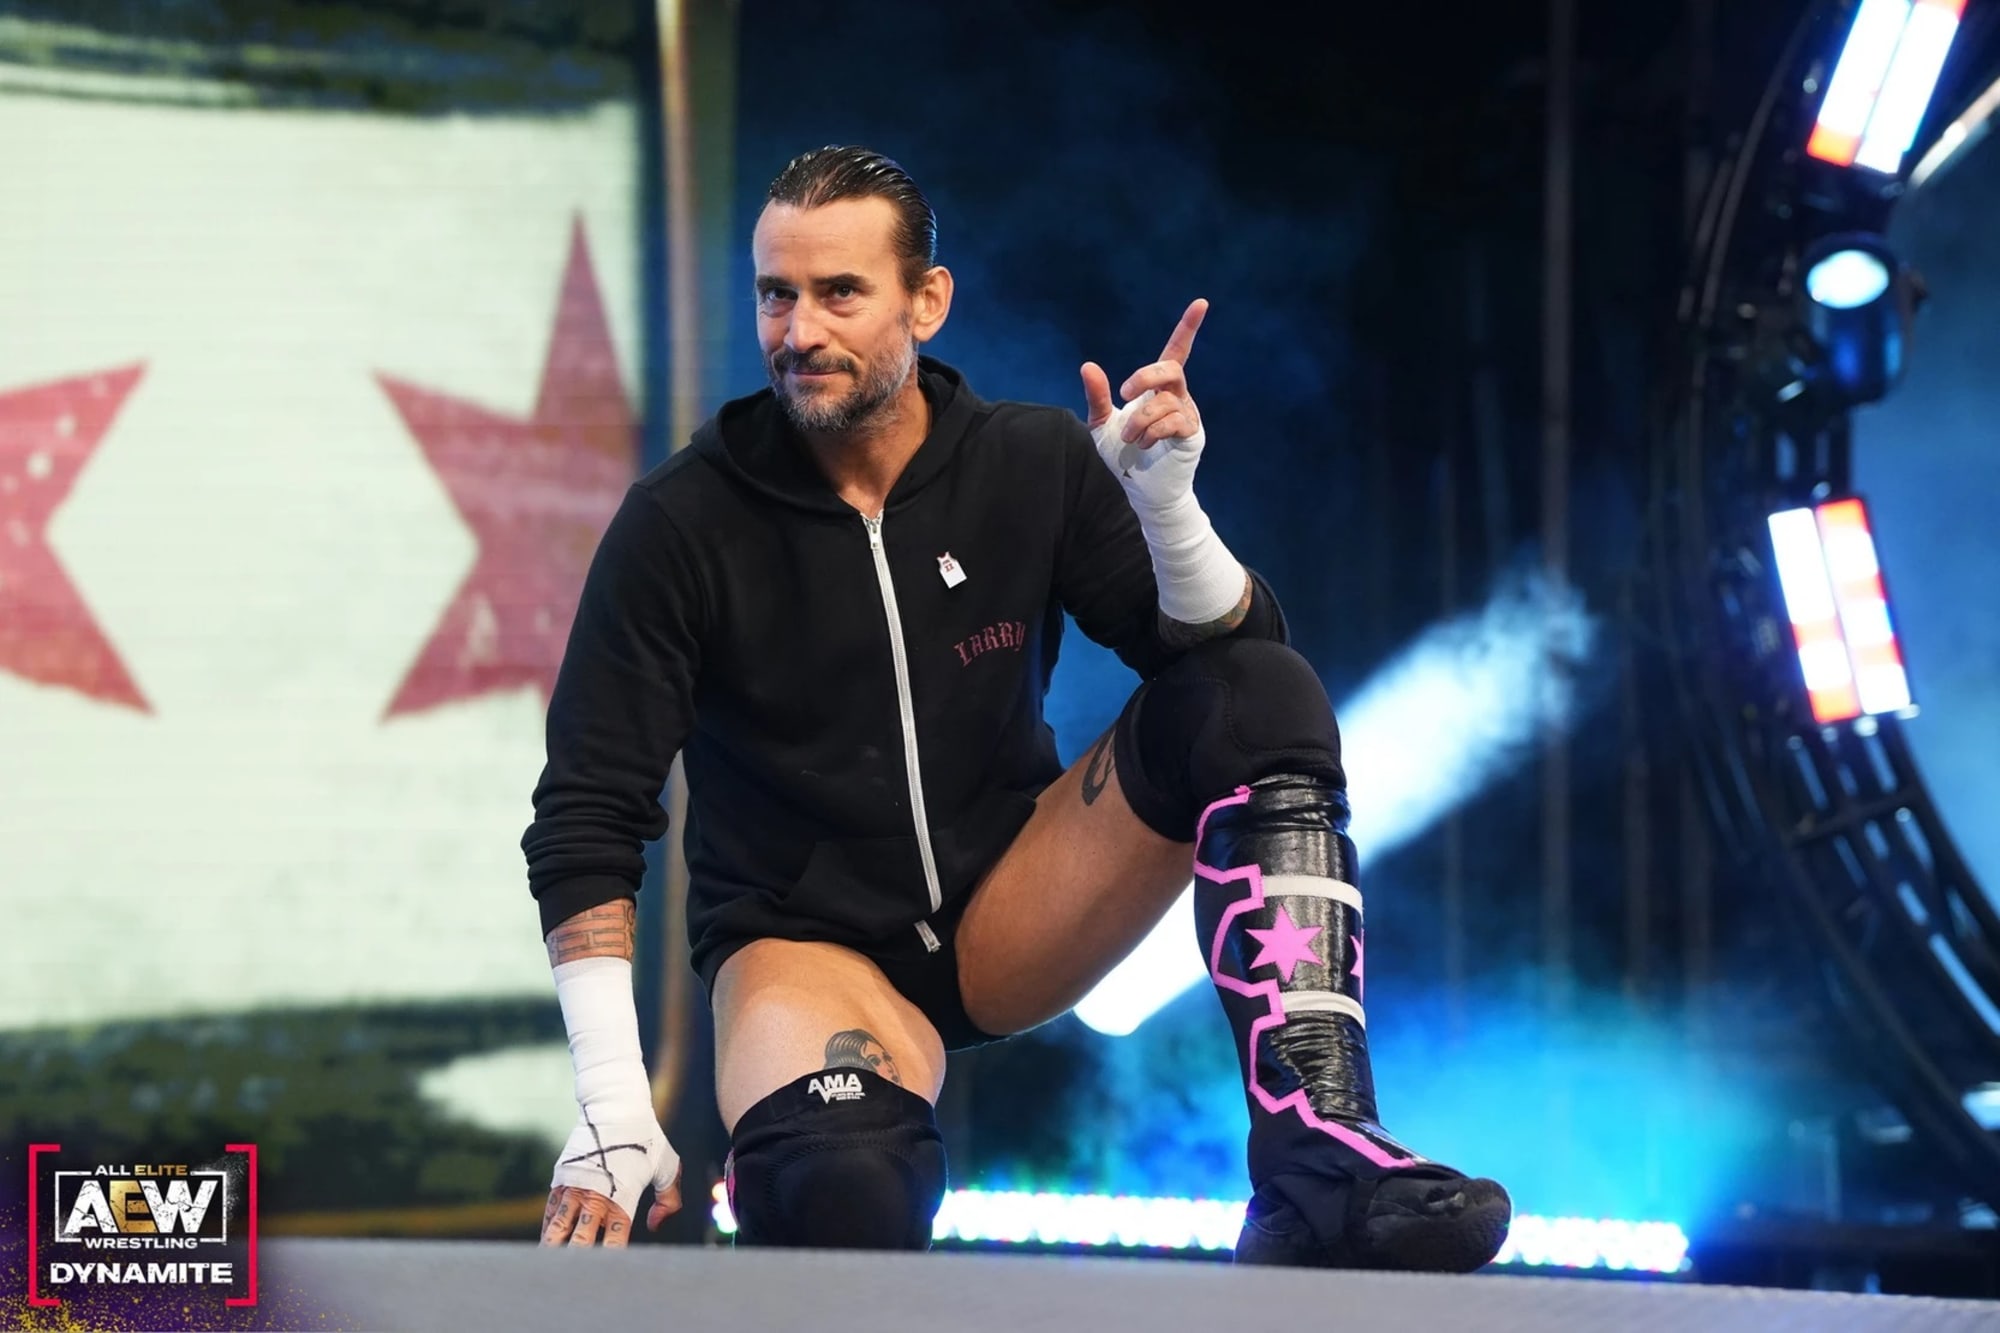 Three long term feuds for CM Punk and his return to AEW